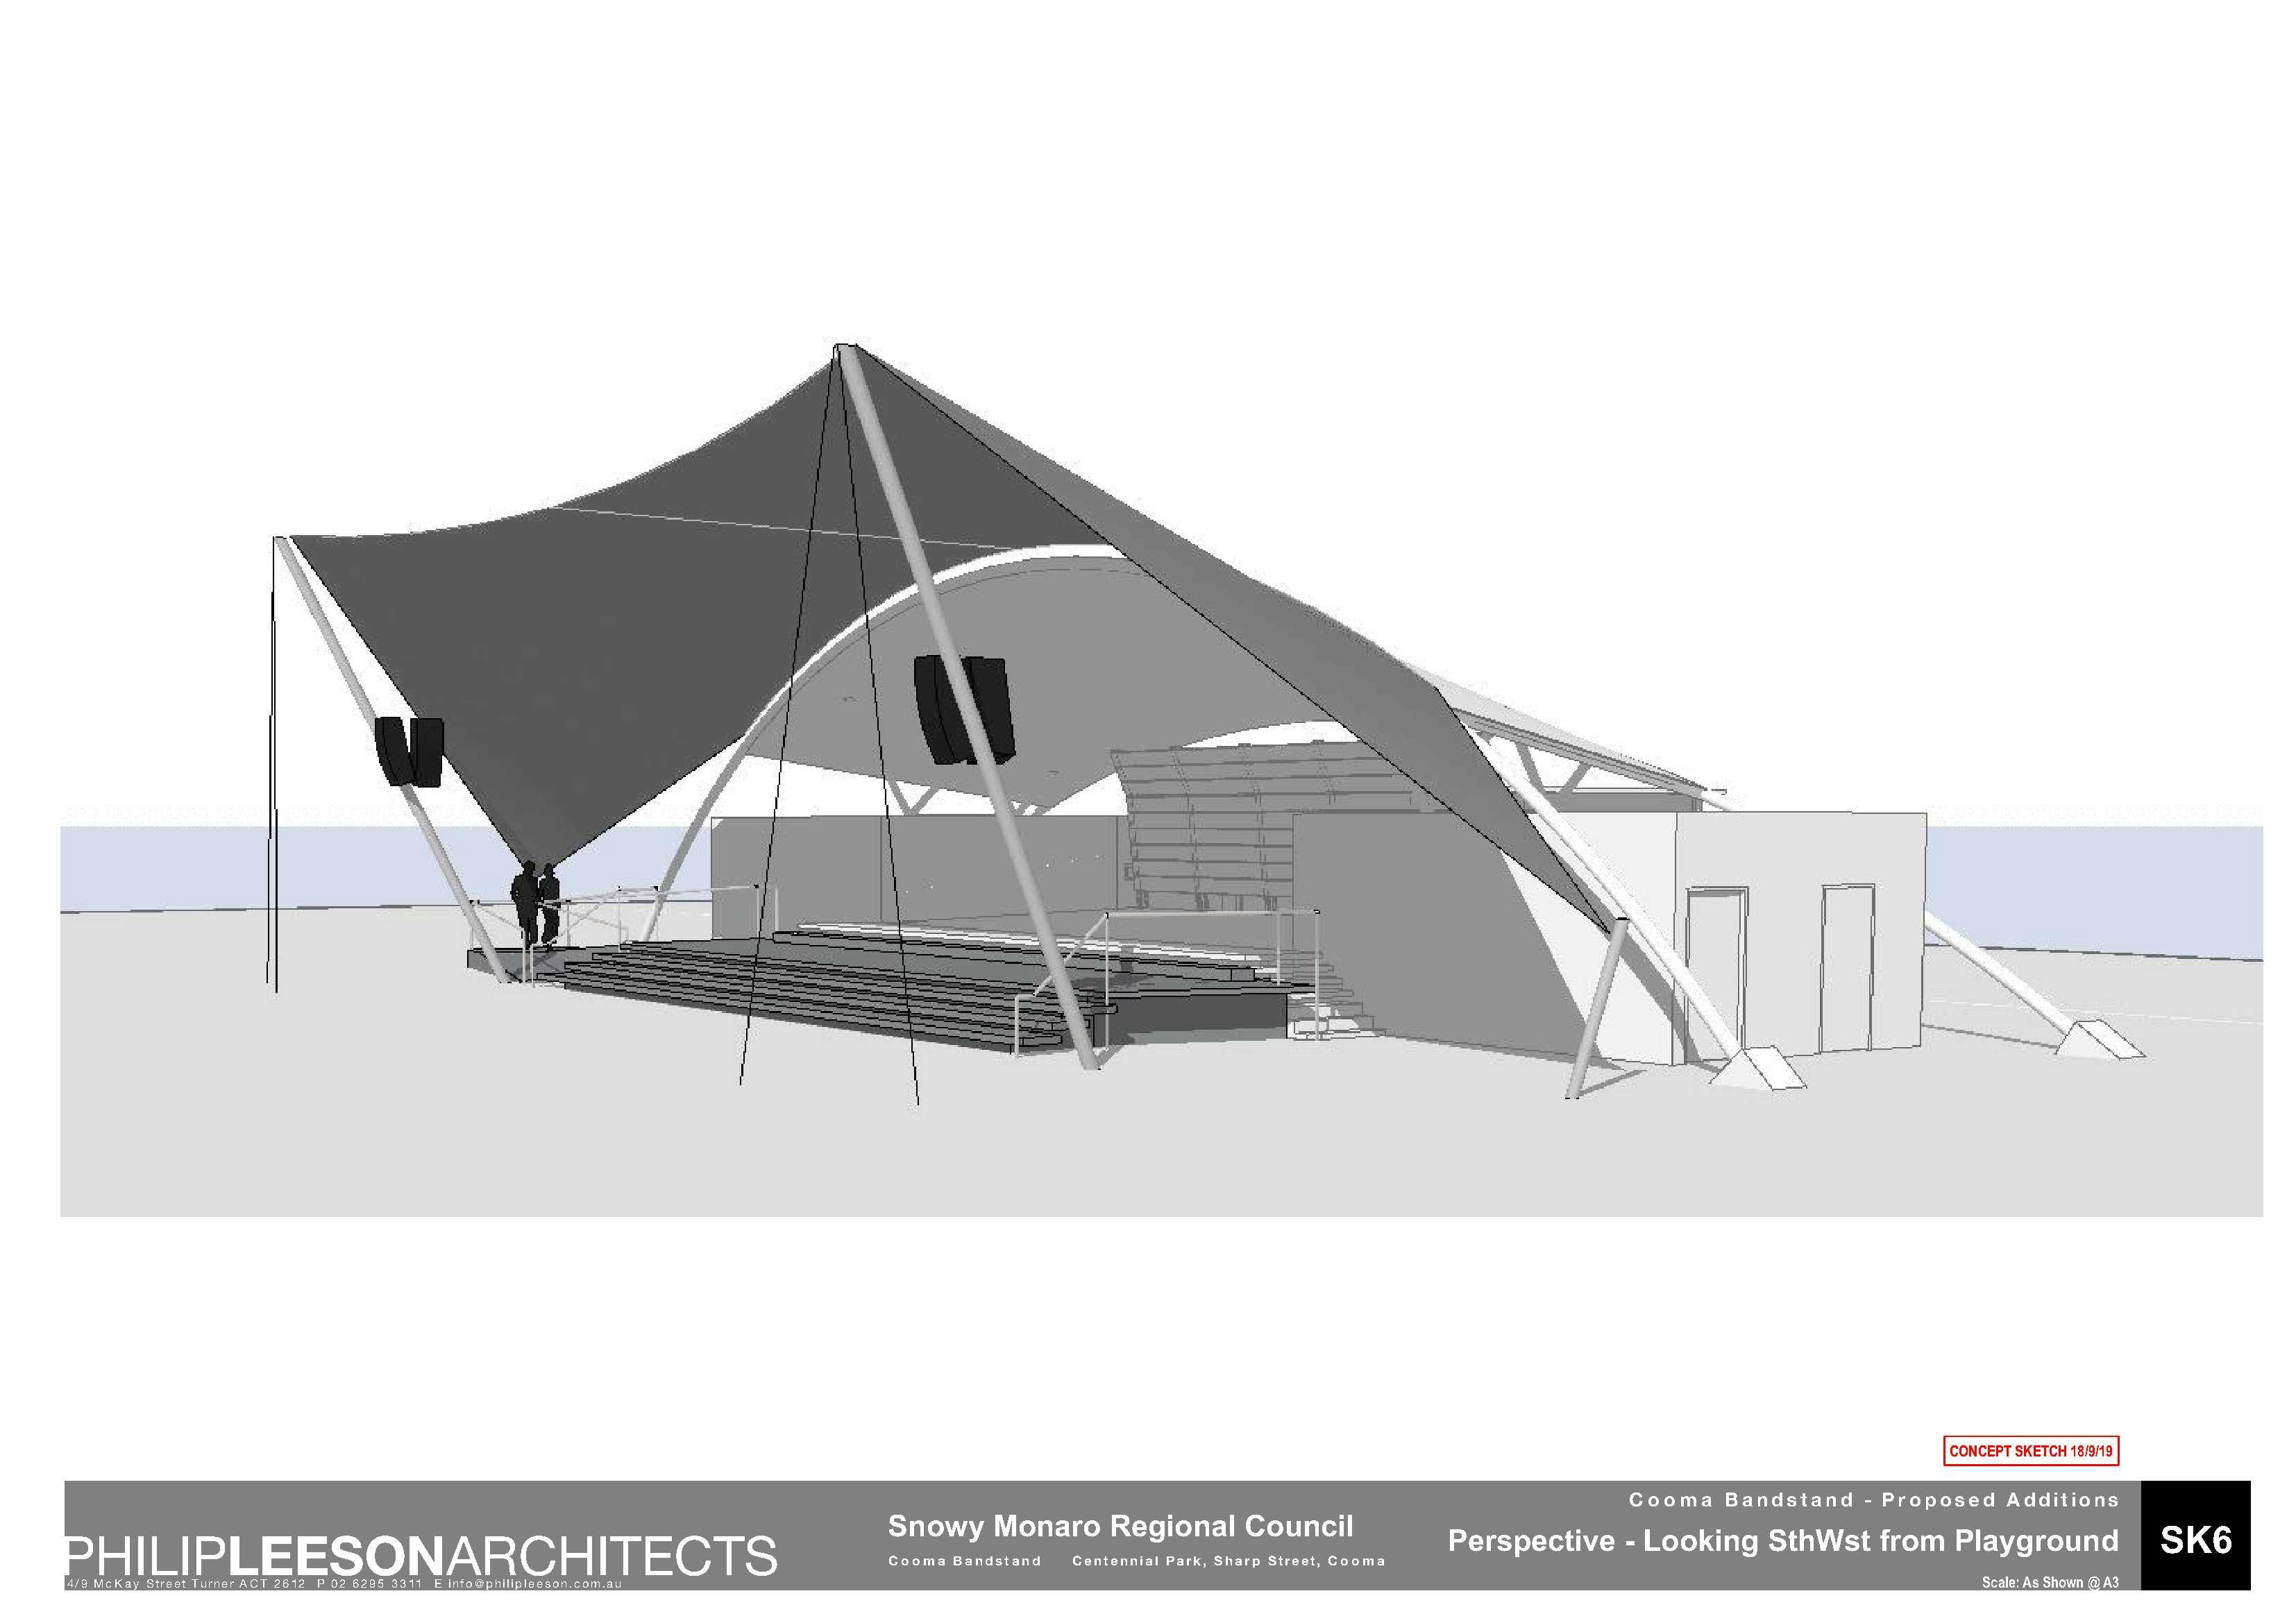 Cooma Bandstand - Proposed Additions_190918 Concept Sketch_6